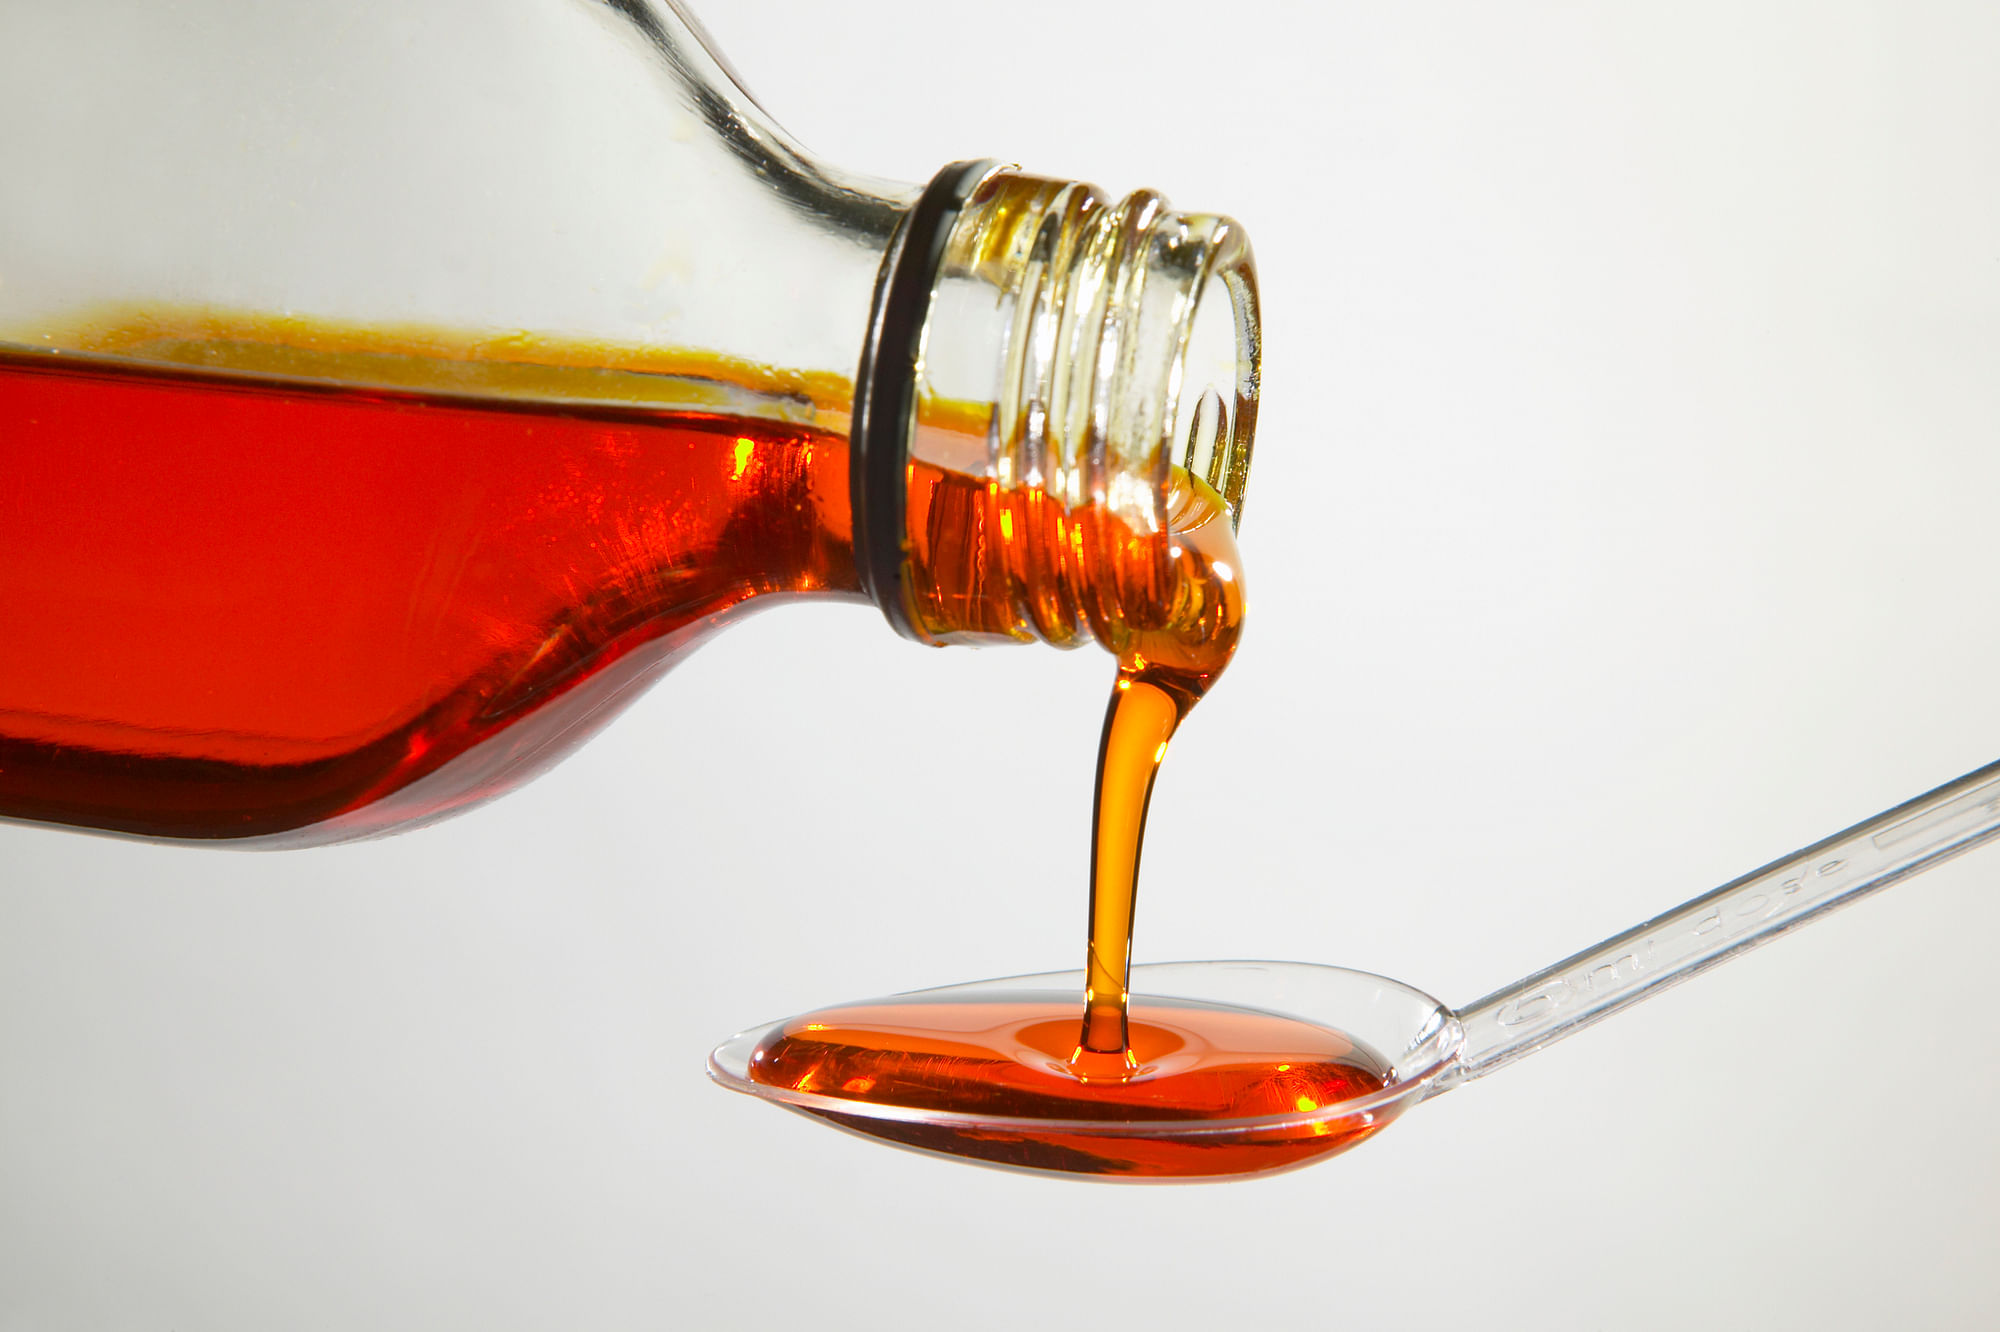 Cough syrup may have led to 11 deaths among children